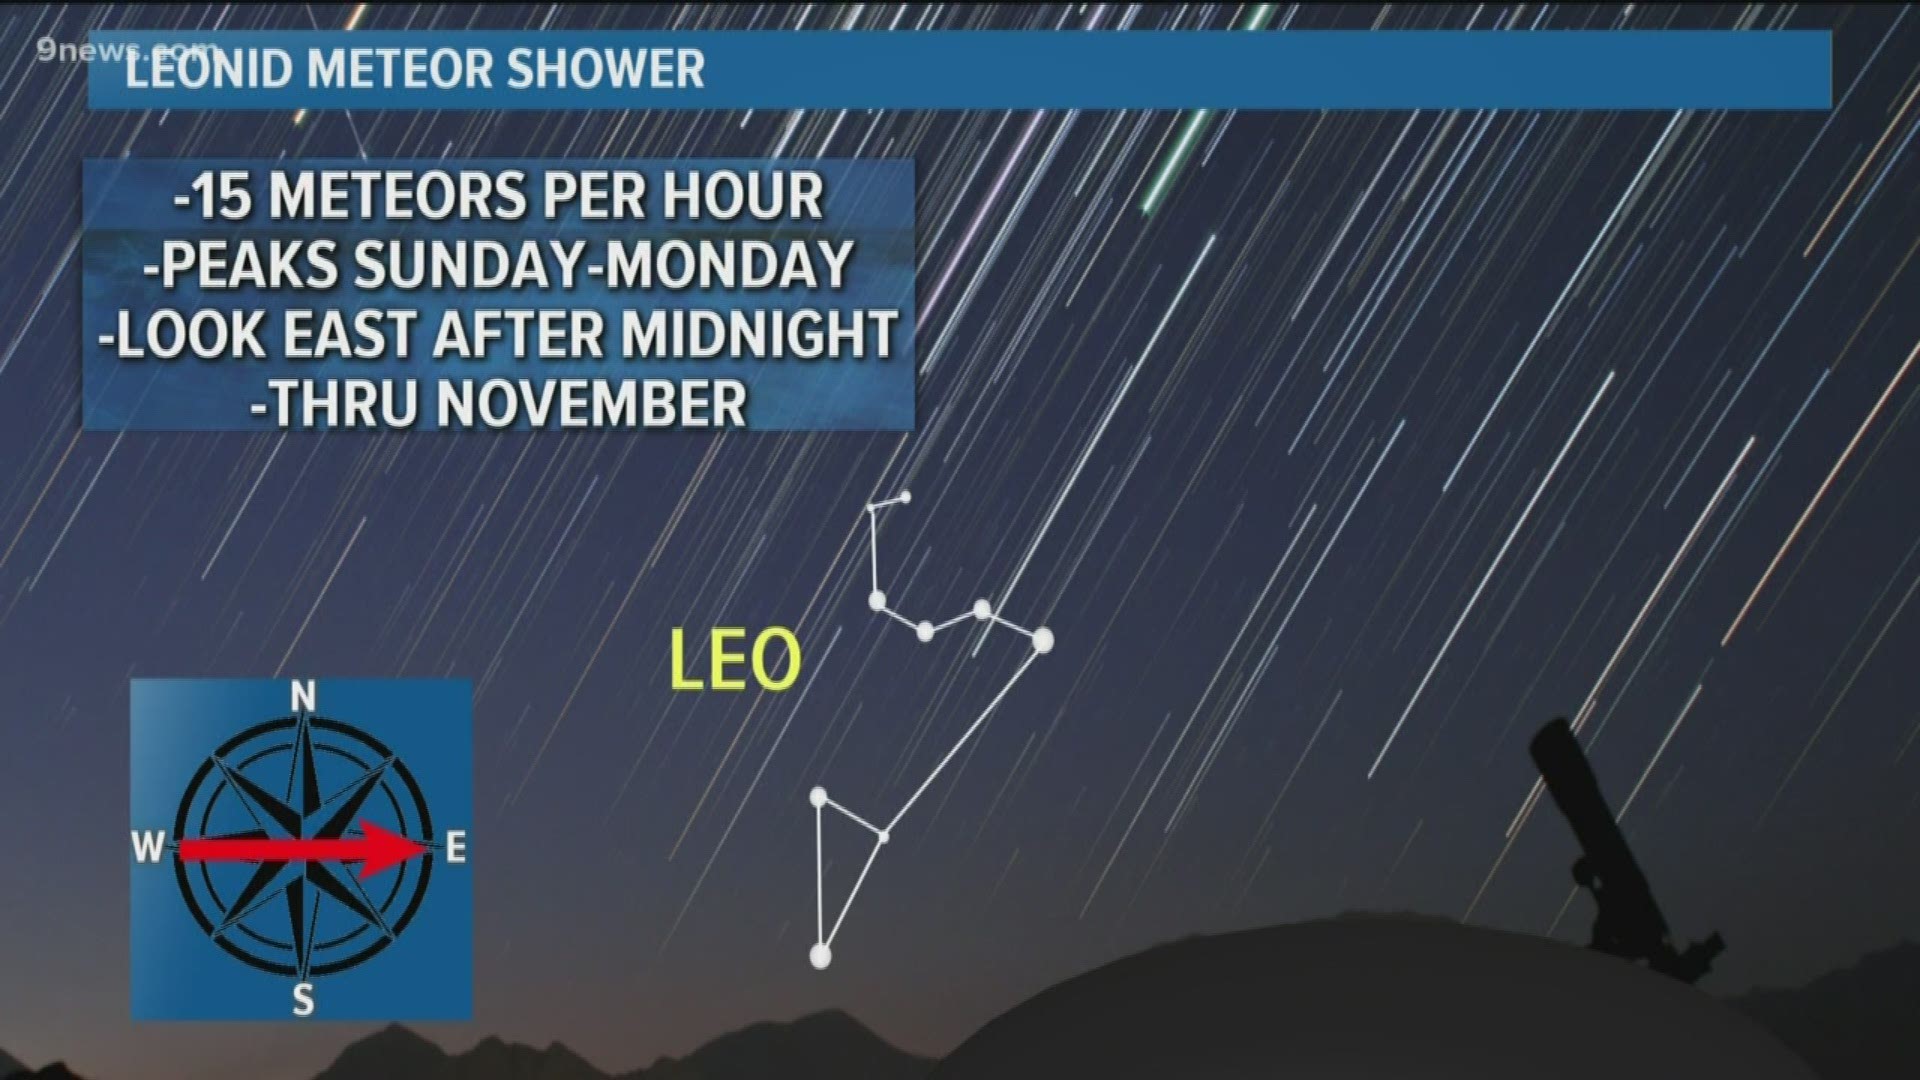 The Leonid meteor shower will reach its peak a few hours before you wake up for work Monday morning. Viewing conditions will be pretty good for the Denver area.